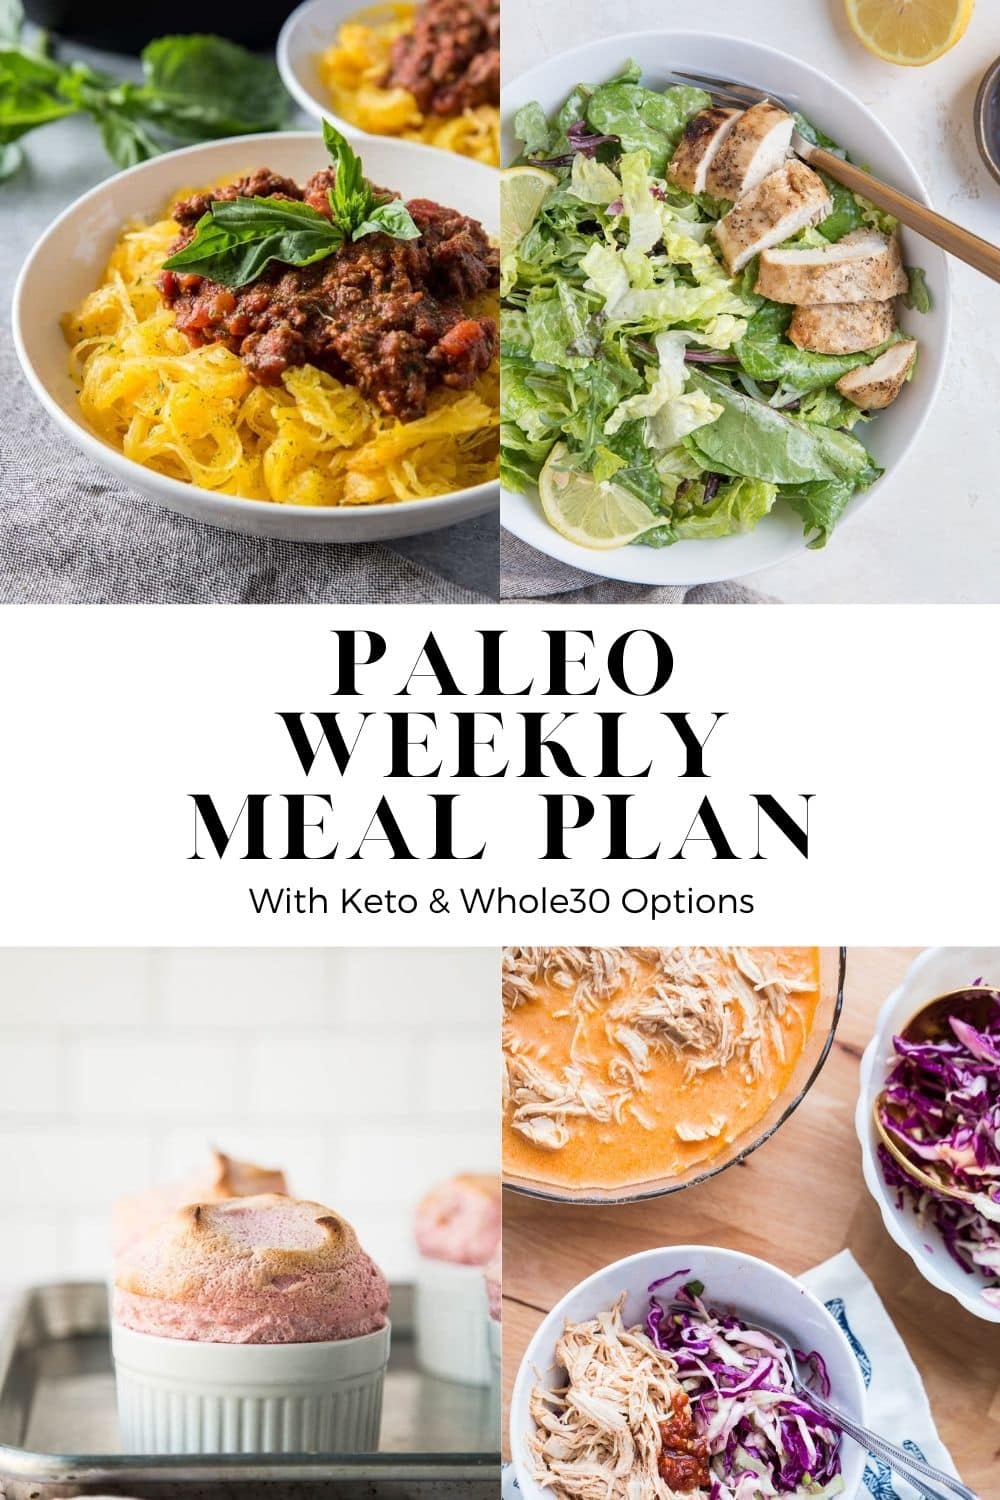 Paleo Weekly Meal Plan with keto and Whole30 options